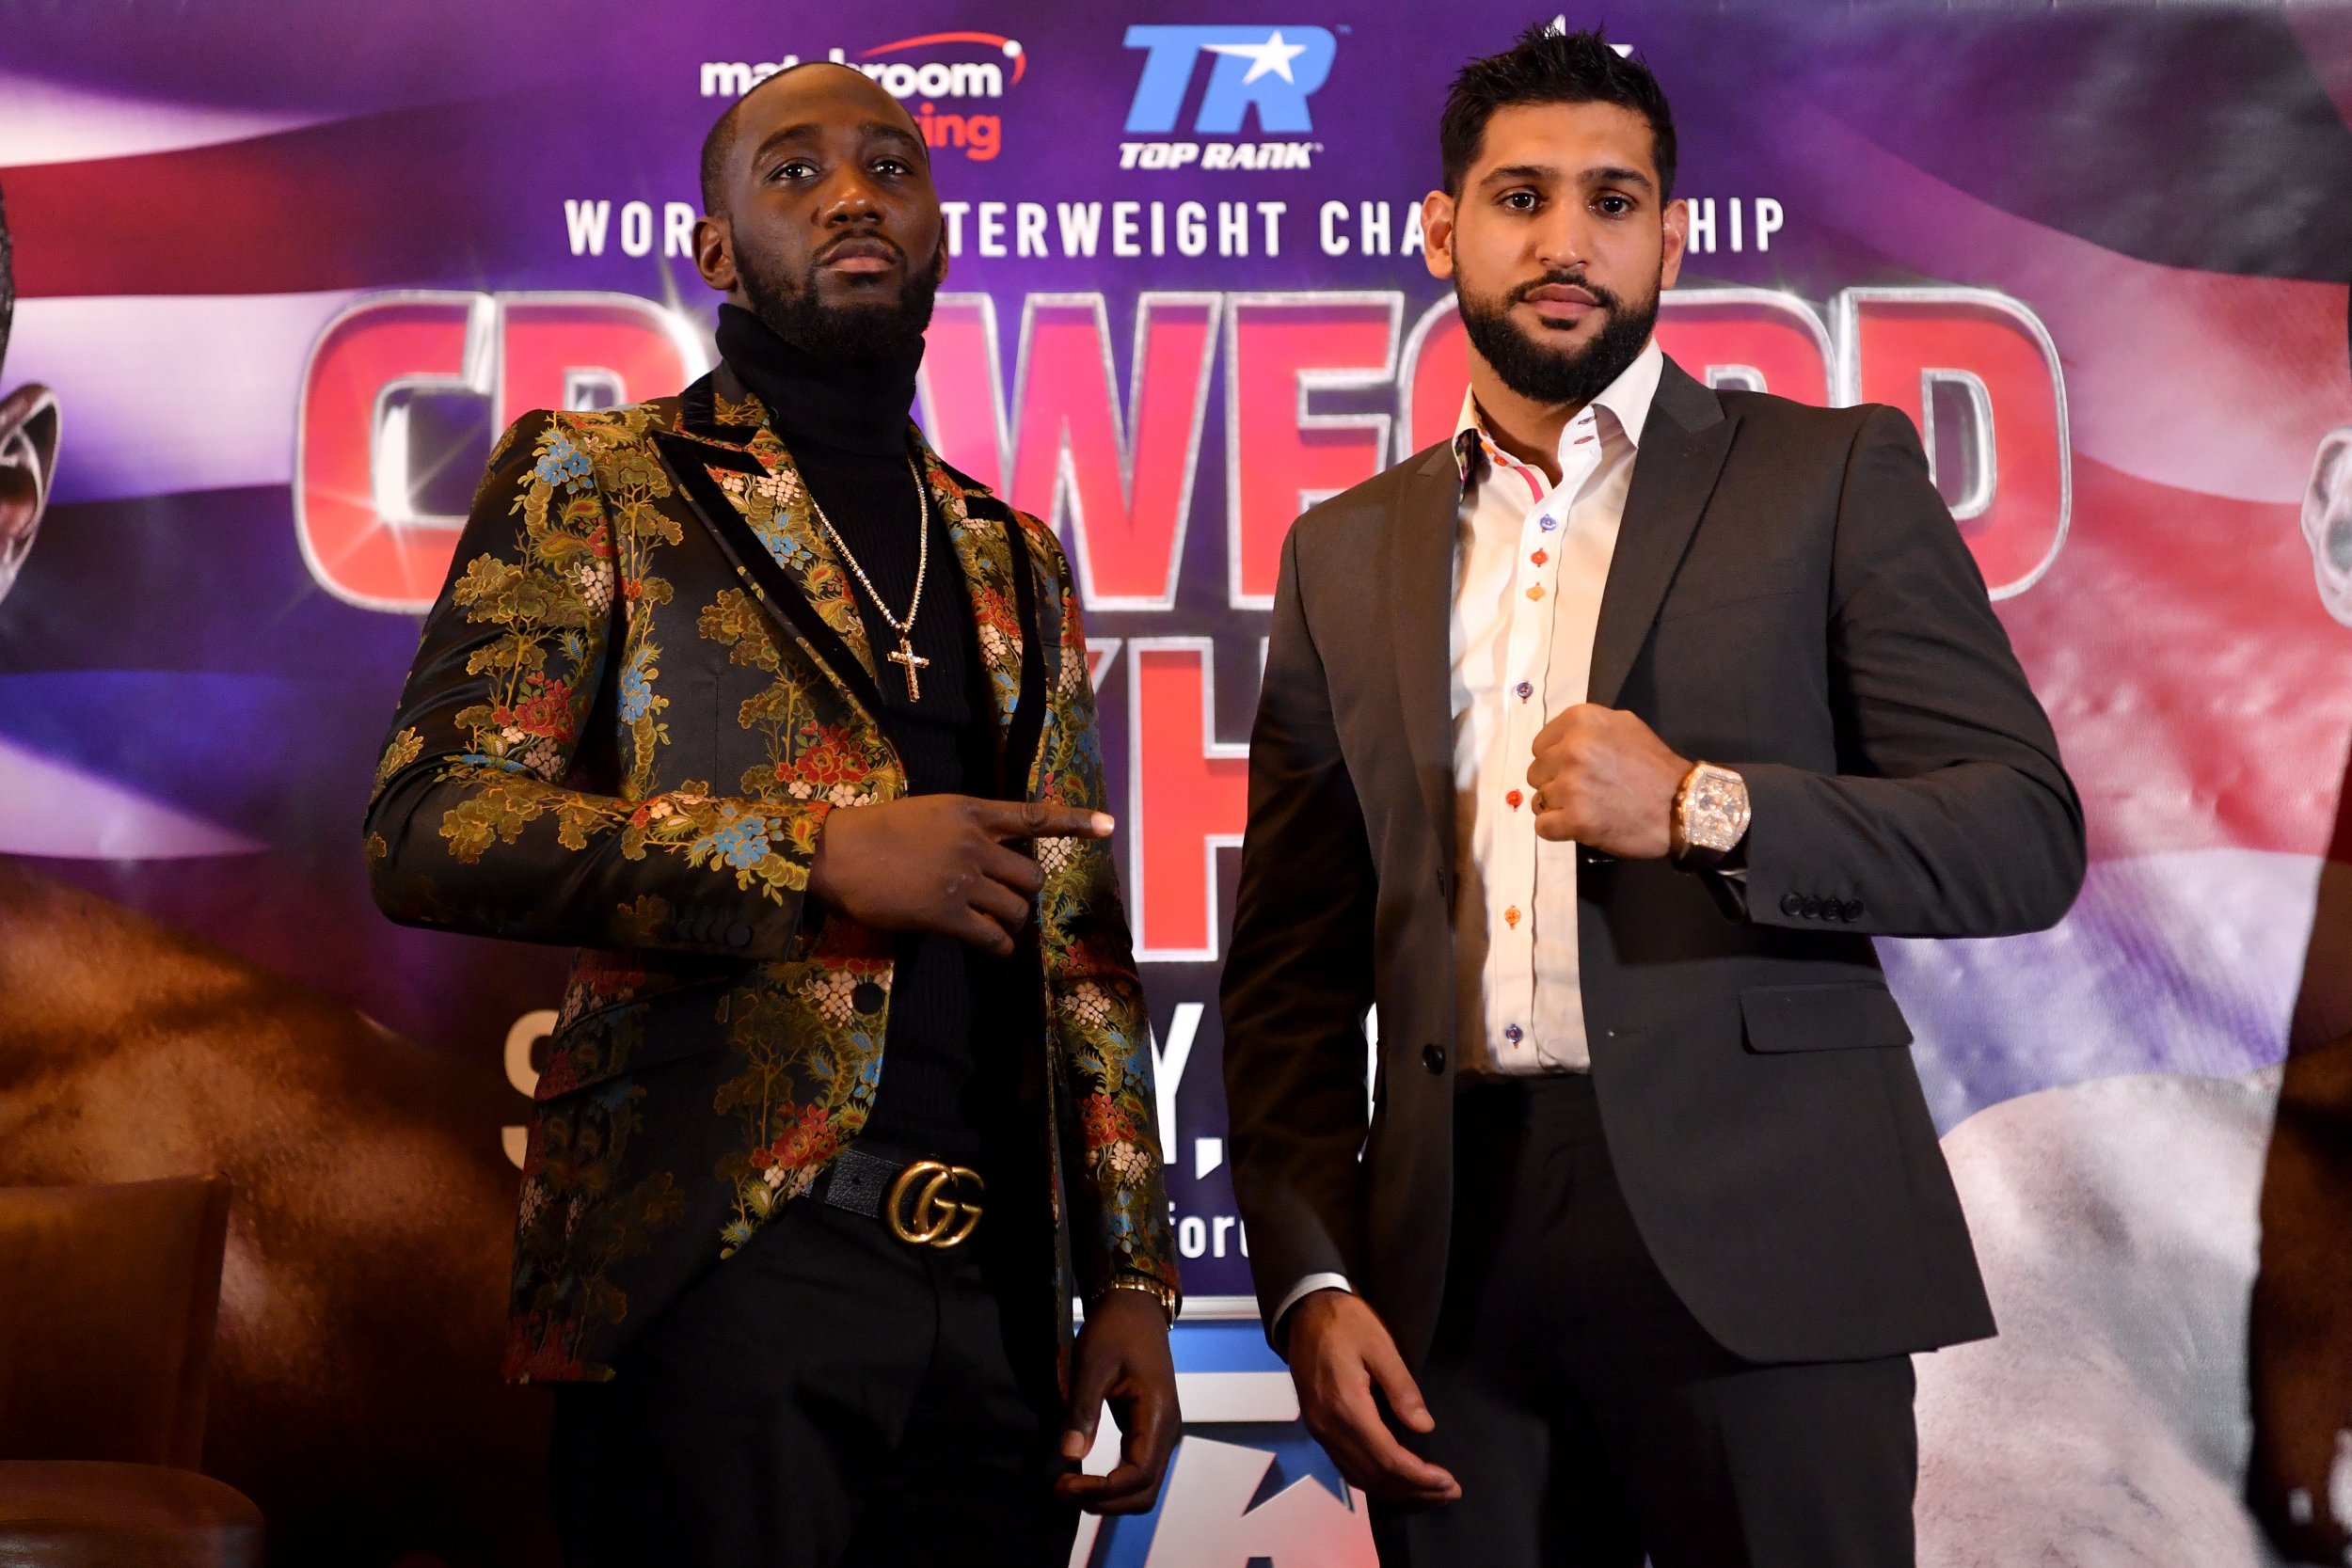 Terence Crawford vs Amir Khan Where to Watch, Live Stream Info and Odds for WBO Welterweight Title Bout